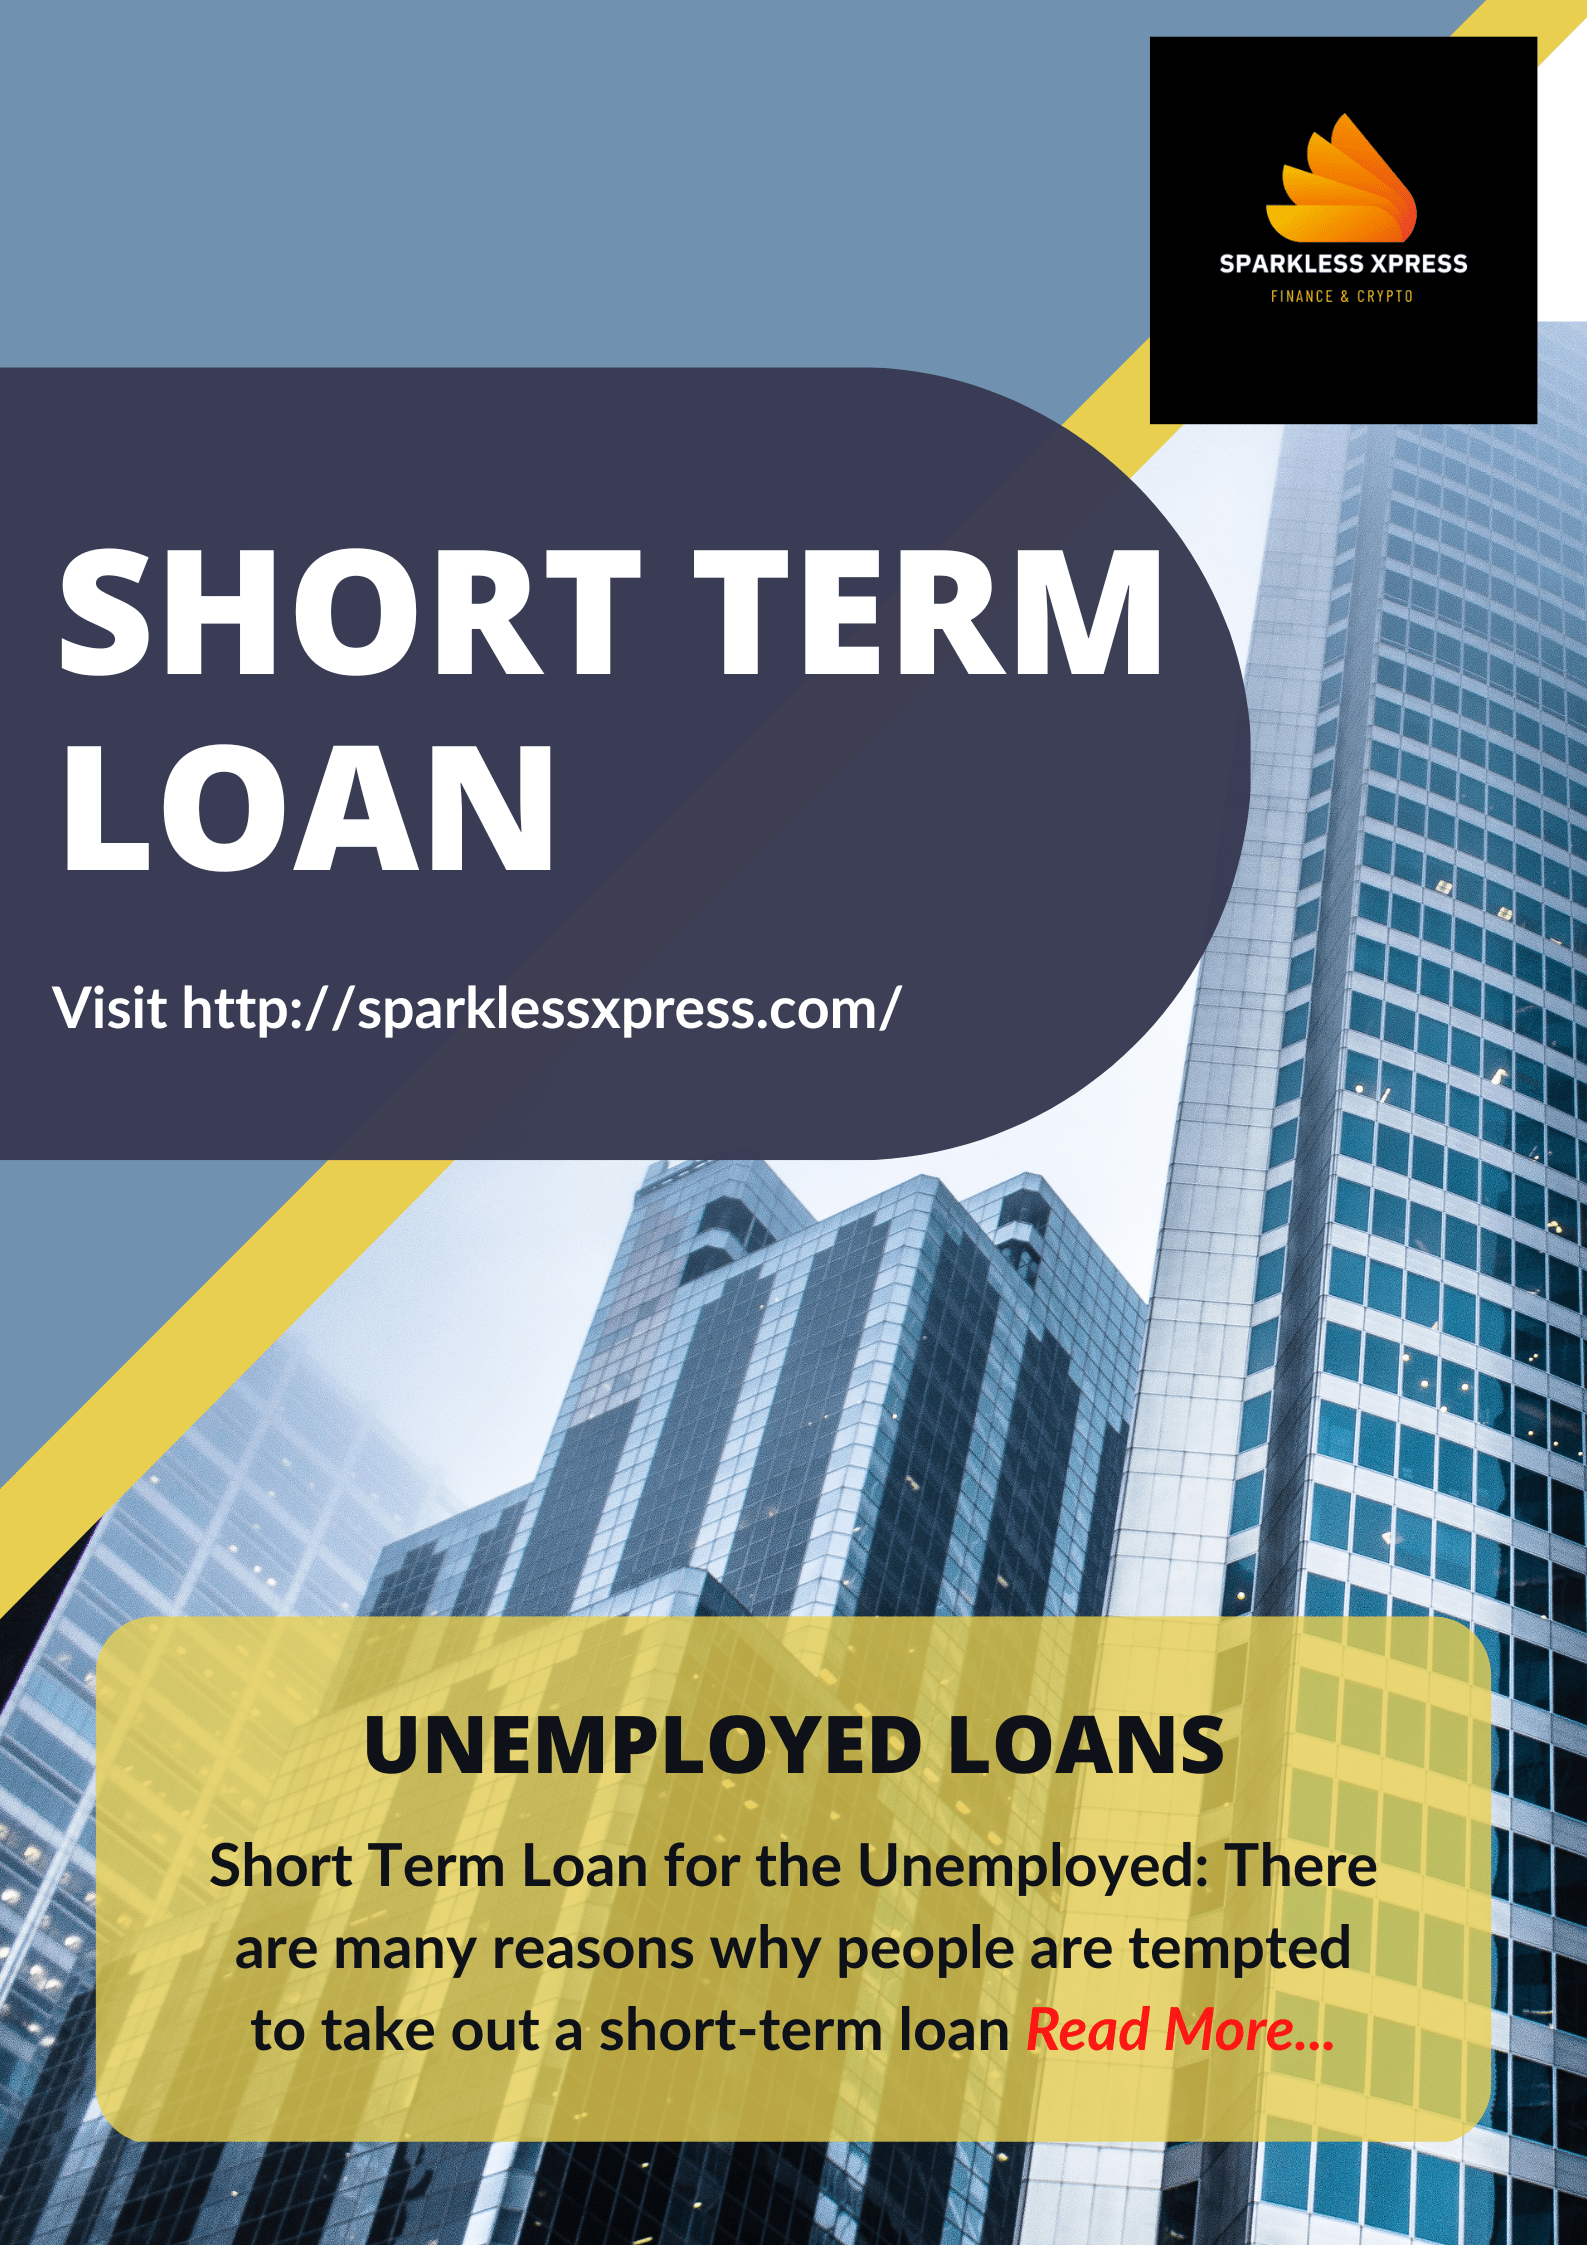 Short Term Loan for the Unemployed